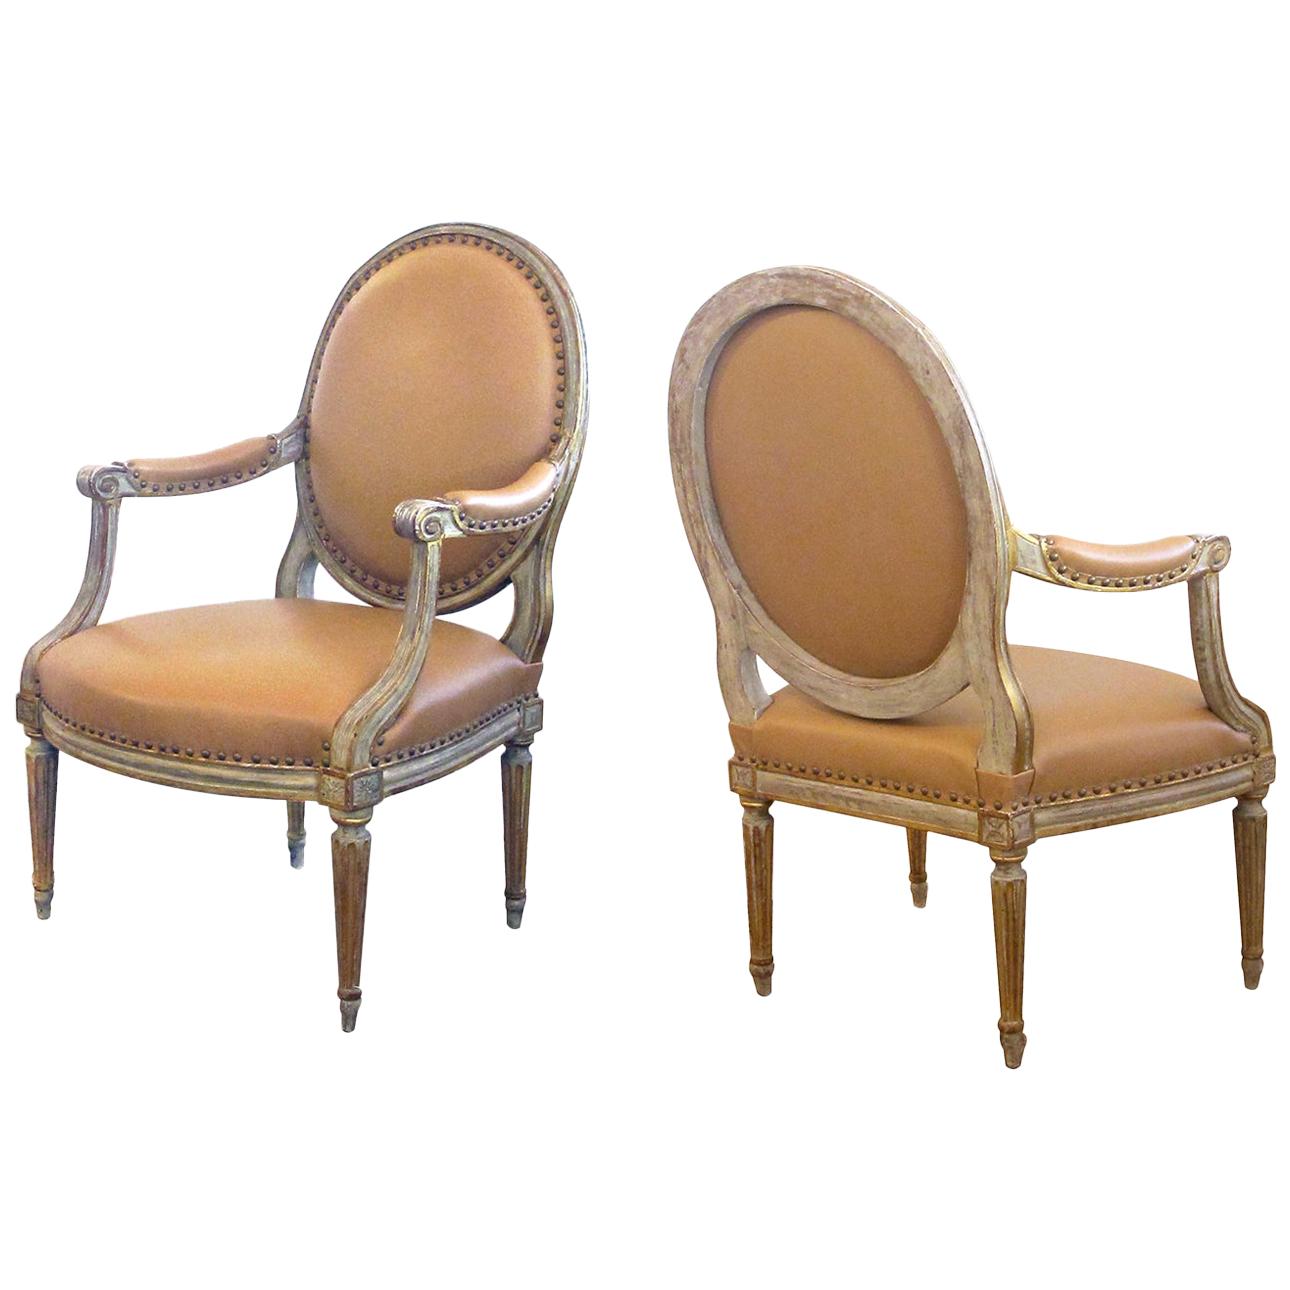 Pair of French Louis XVI Style Grey/Green Painted and Parcel-Gilt Armchairs